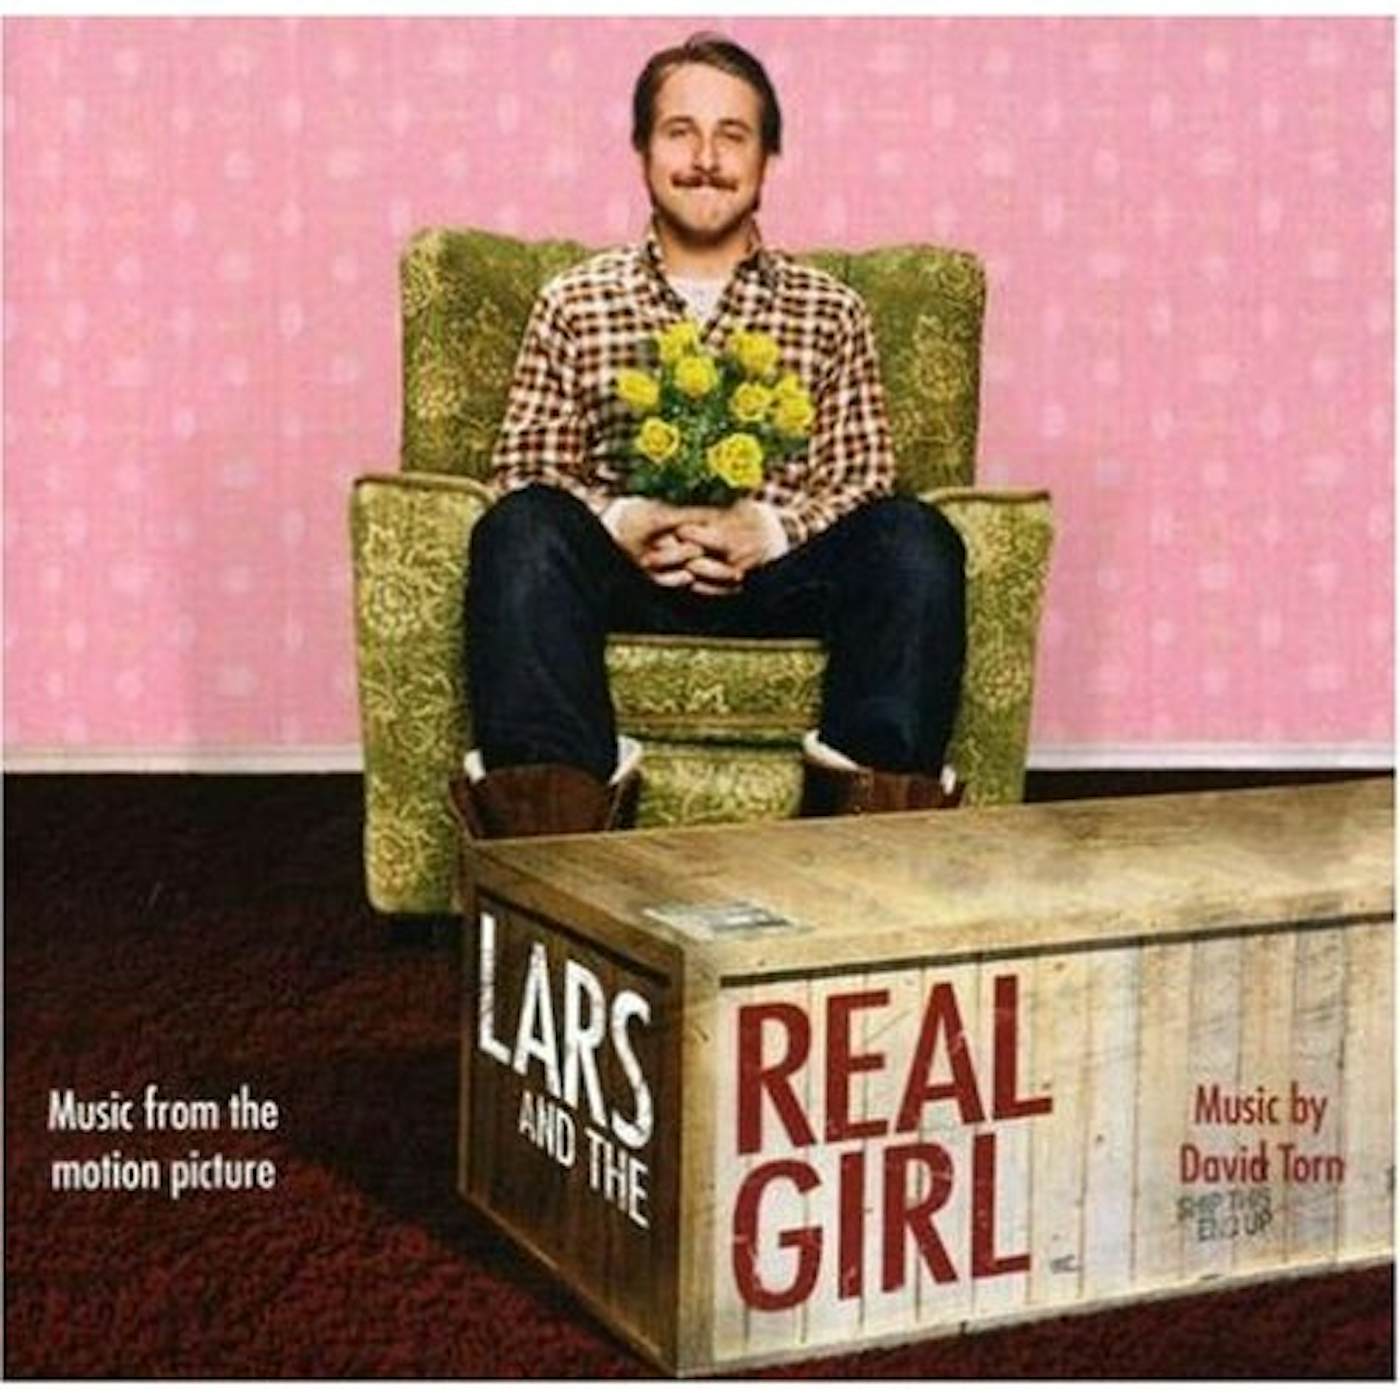 David Torn Lars And The Real Girl: Music From The Motion Picture CD